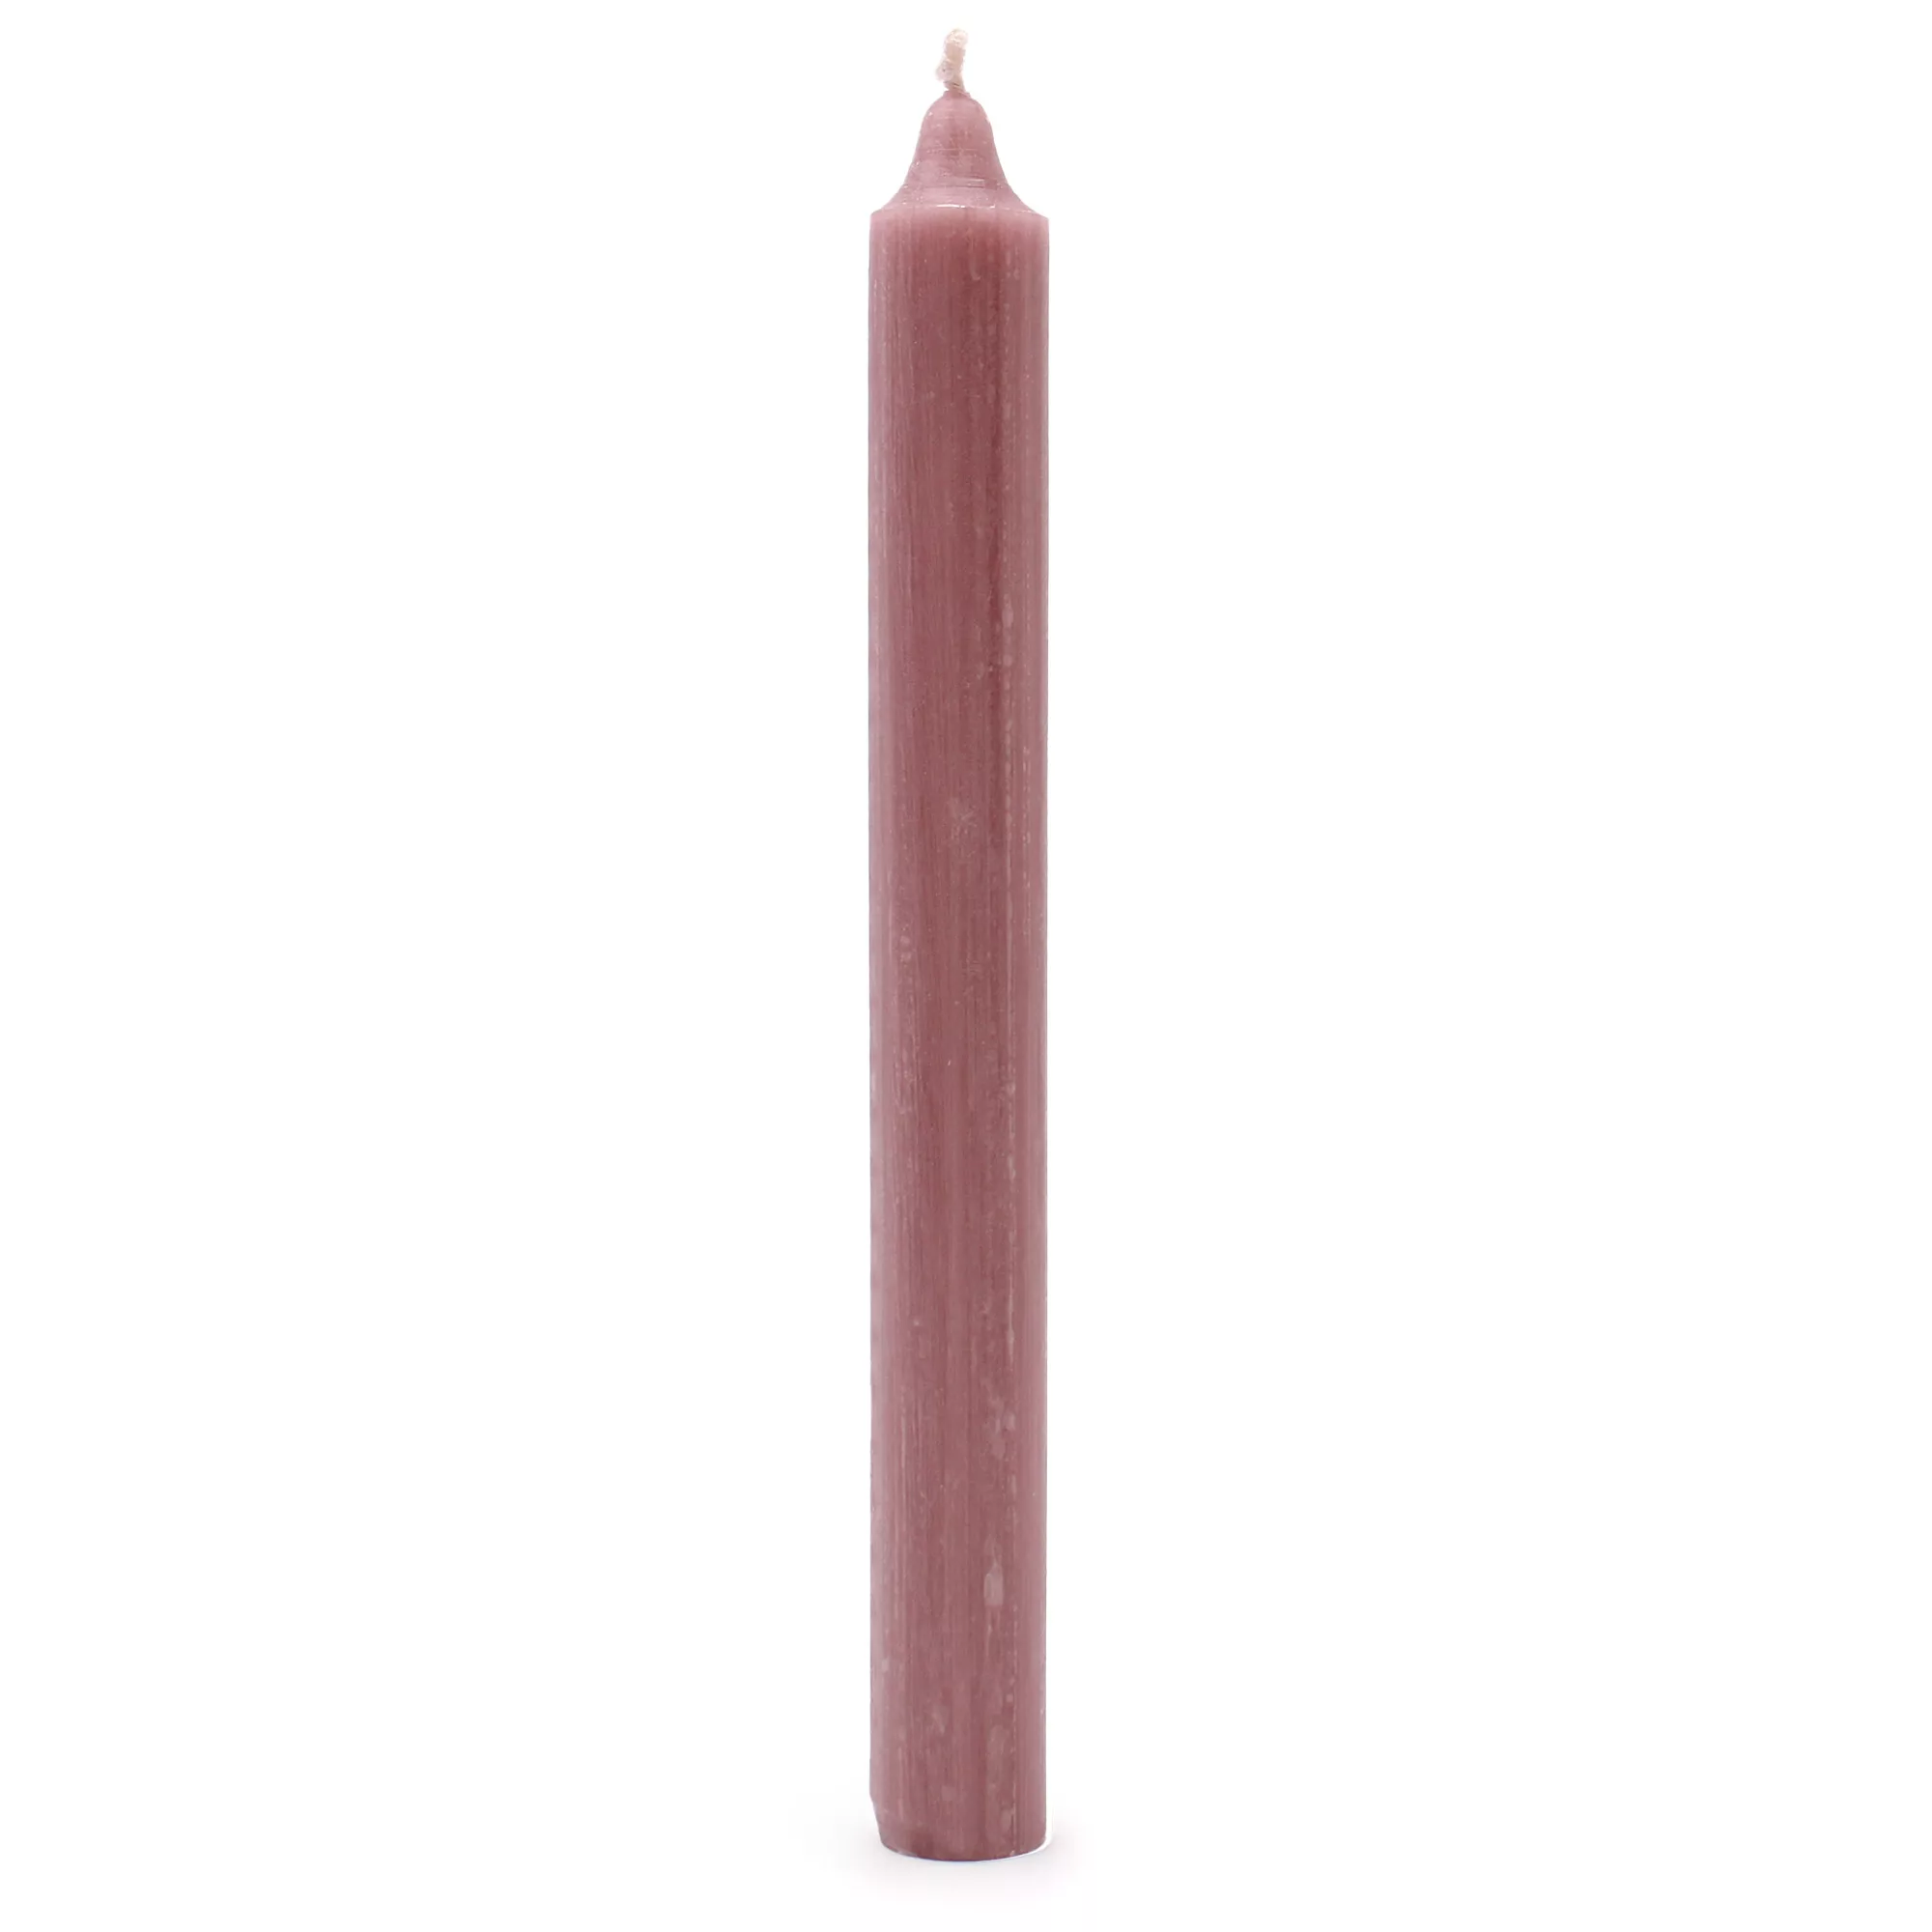 Solid Colour Dinner Candles – Rustic Dusty Pink – Pack of 5